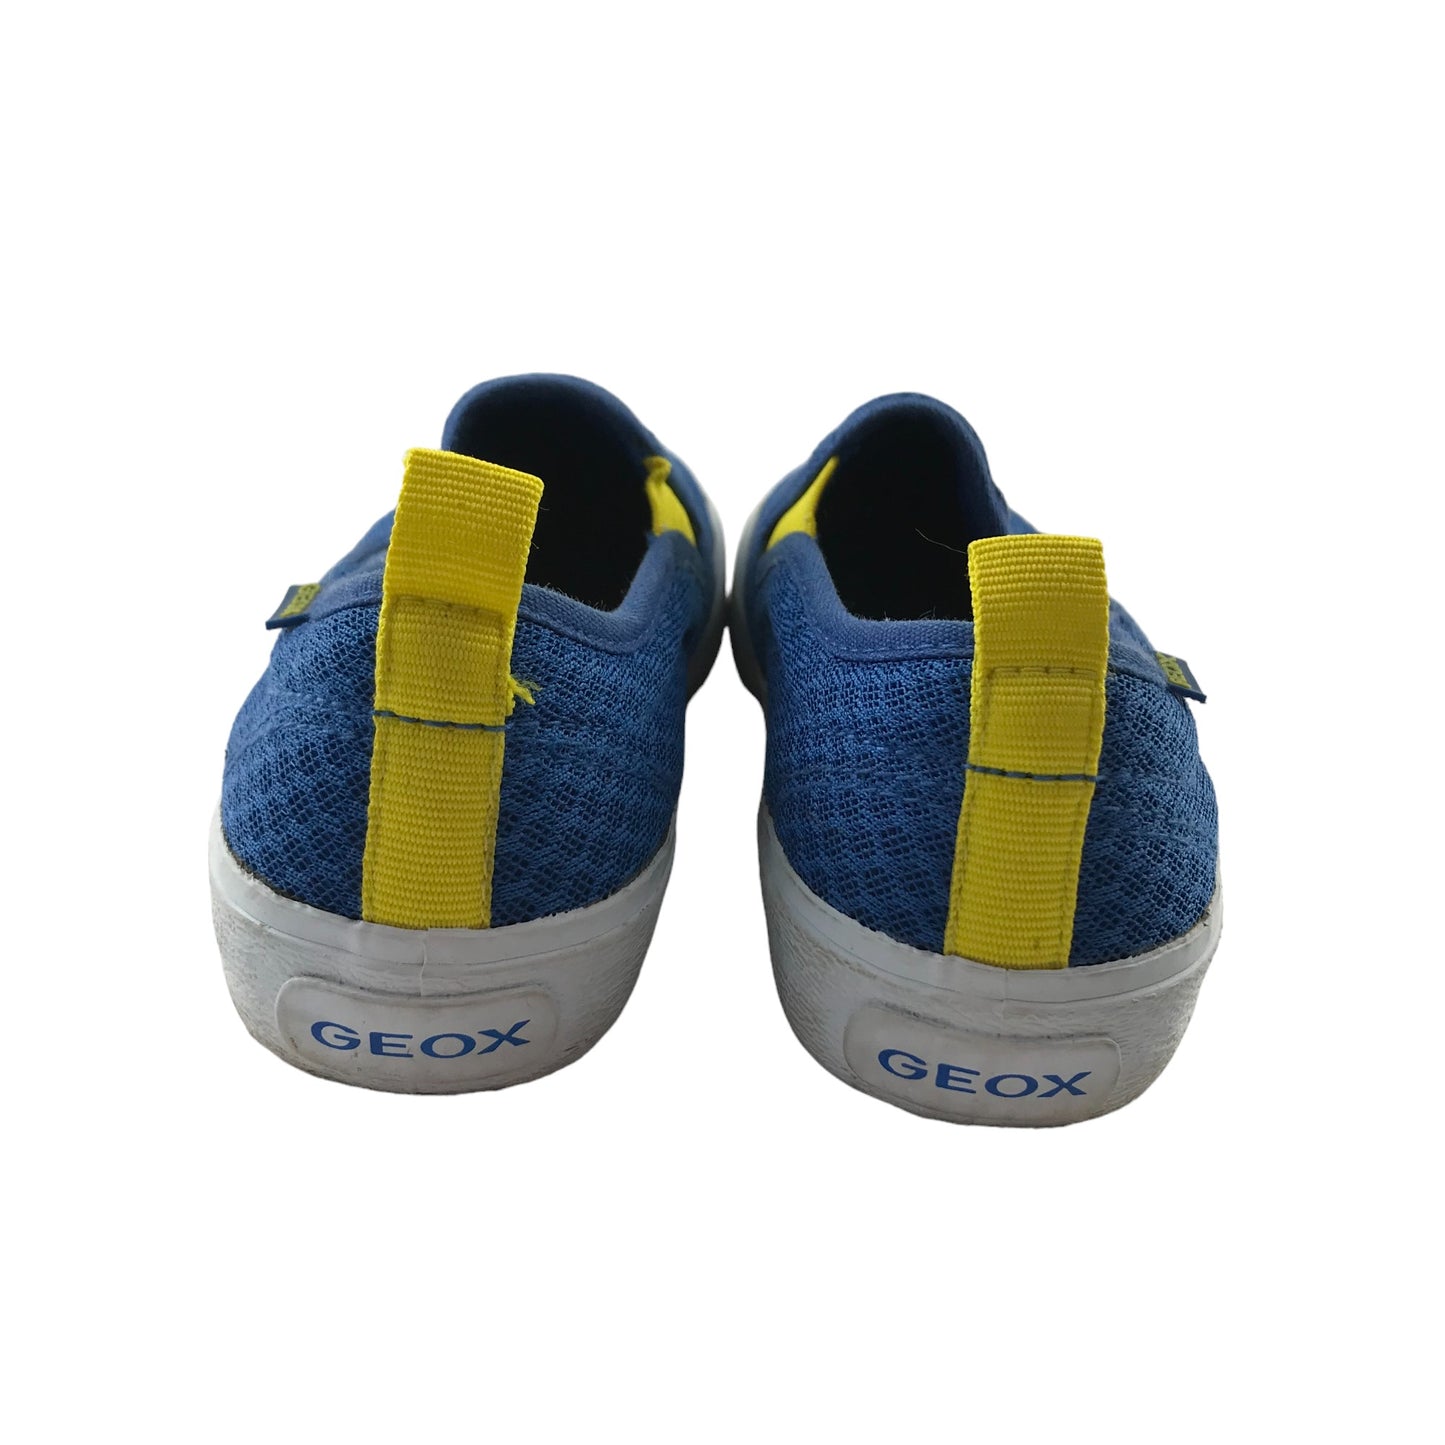 Geox Plimsolls Shoe Size 11.5 Junior Royal Blue with Yellow Detailing